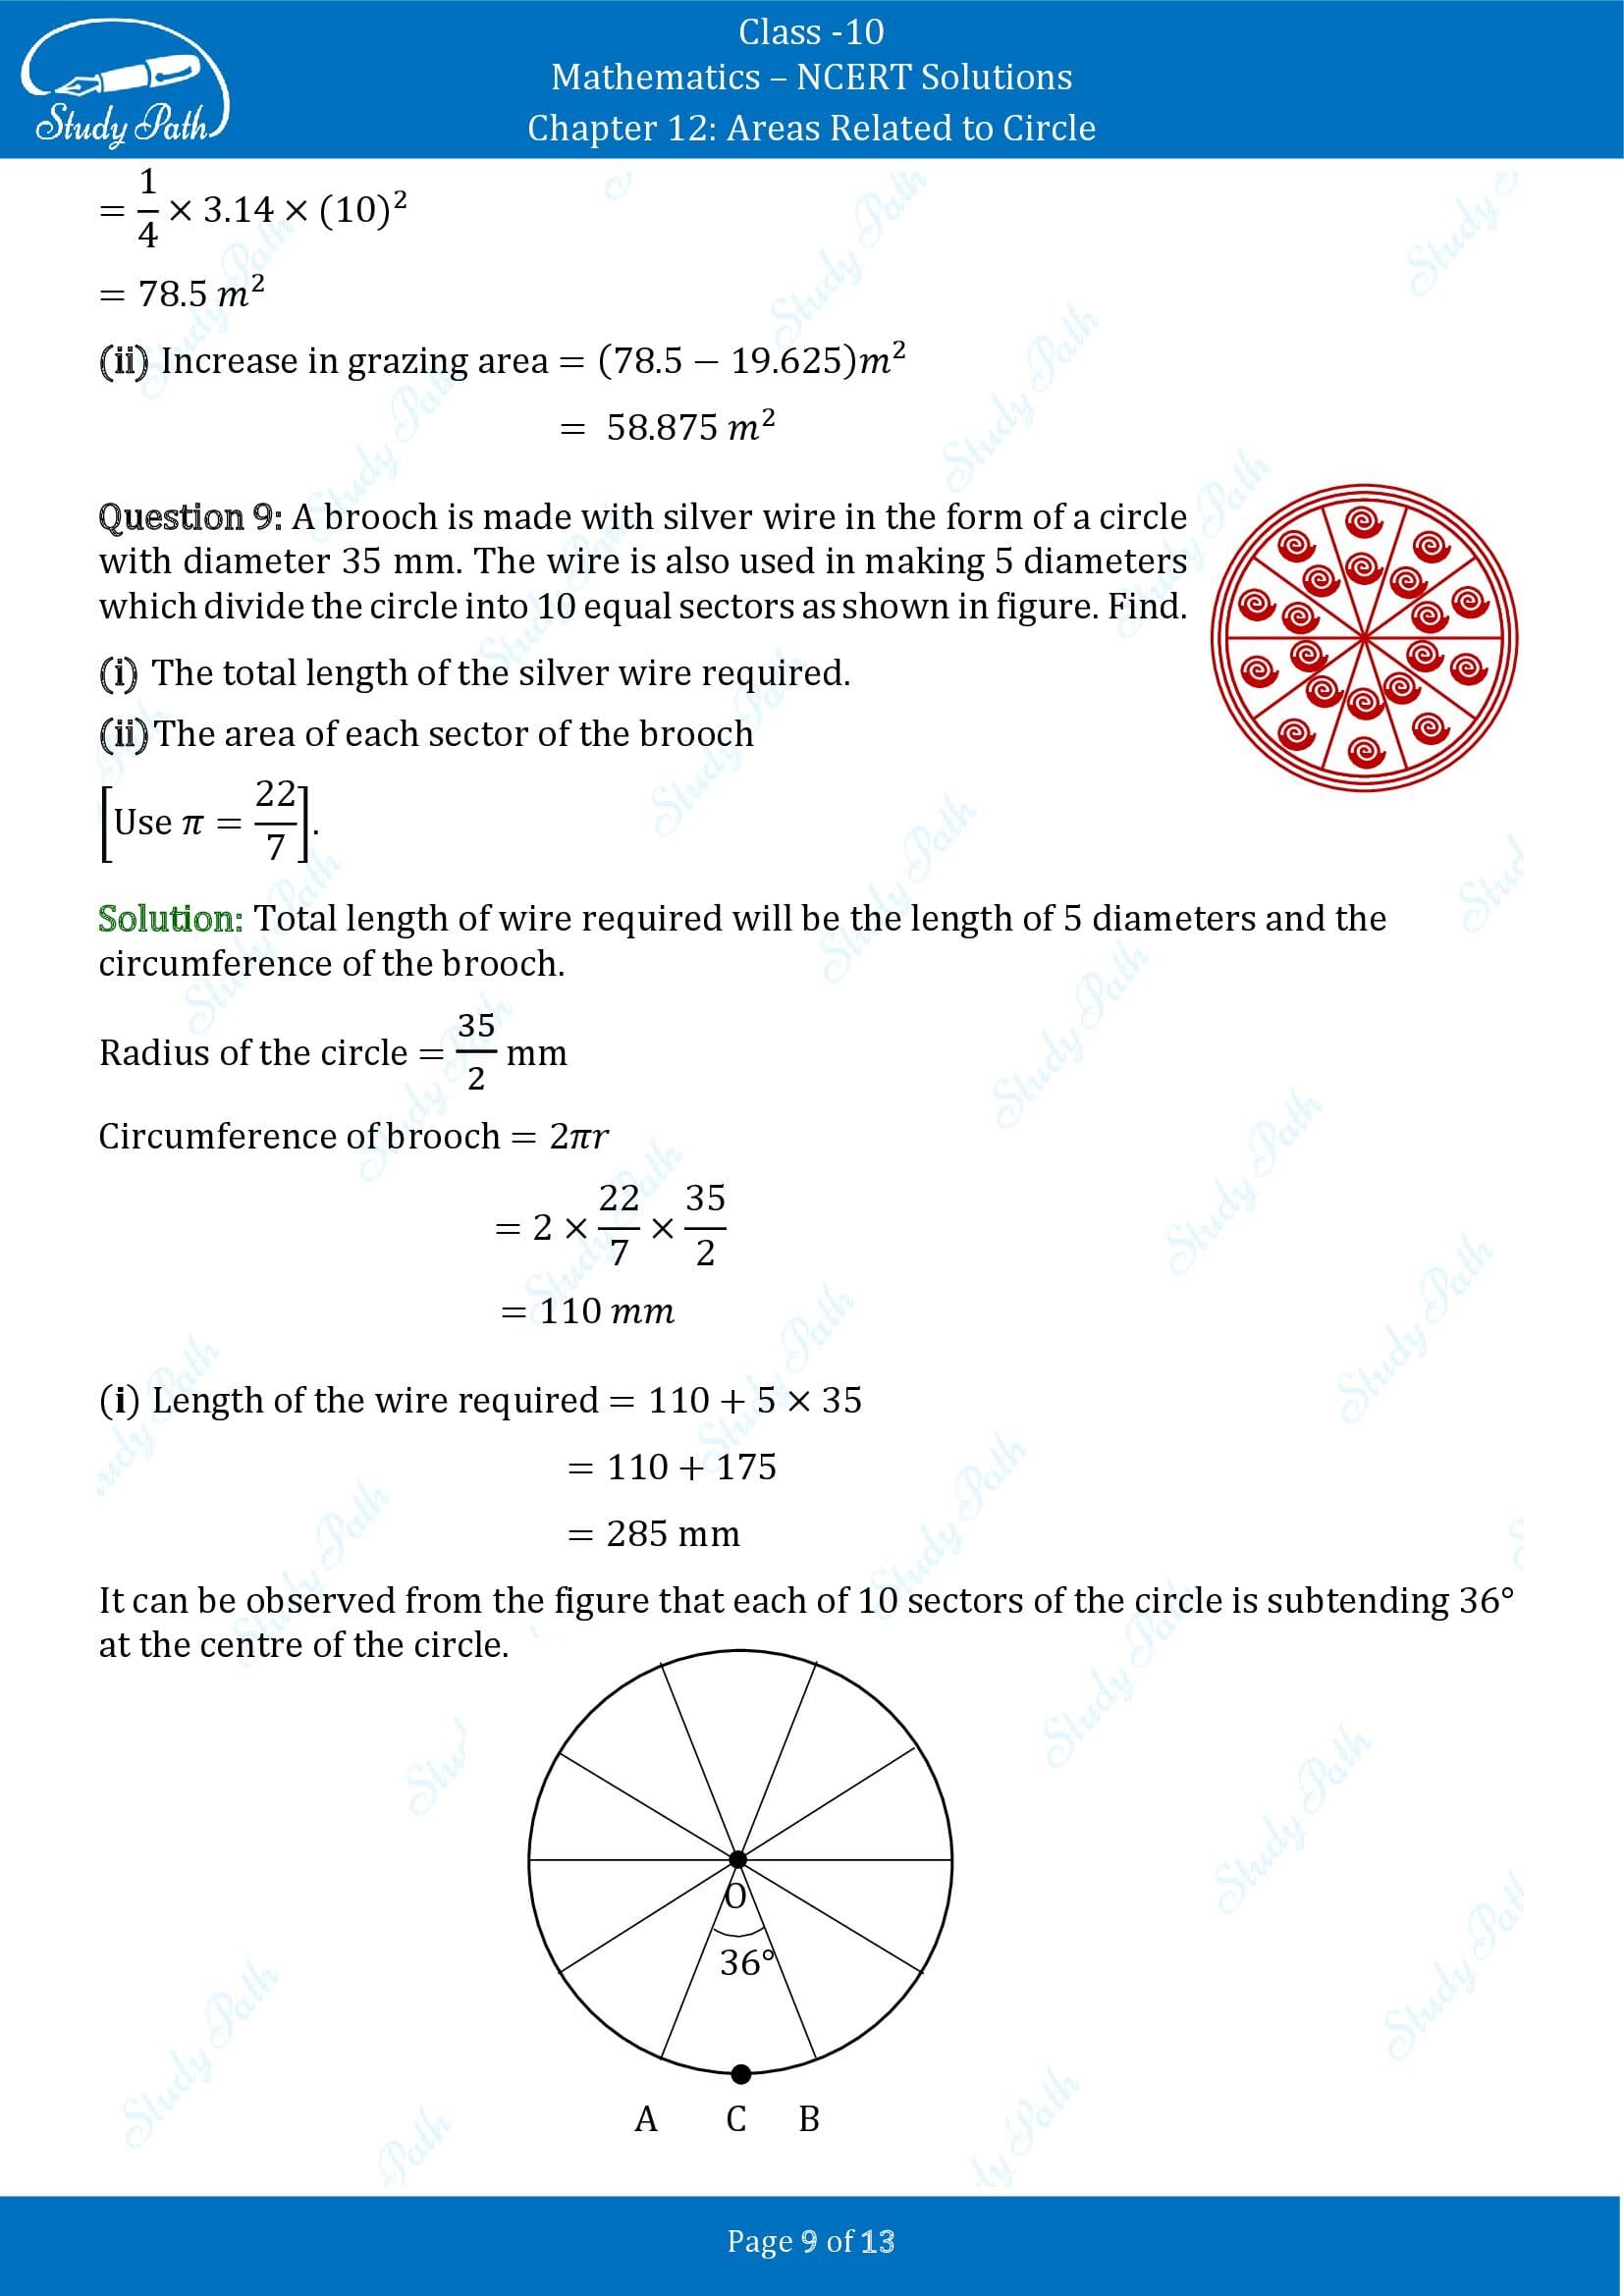 NCERT Solutions for Class 10 Maths Chapter 12 Areas Related to Circles Exercise 12.2 00009